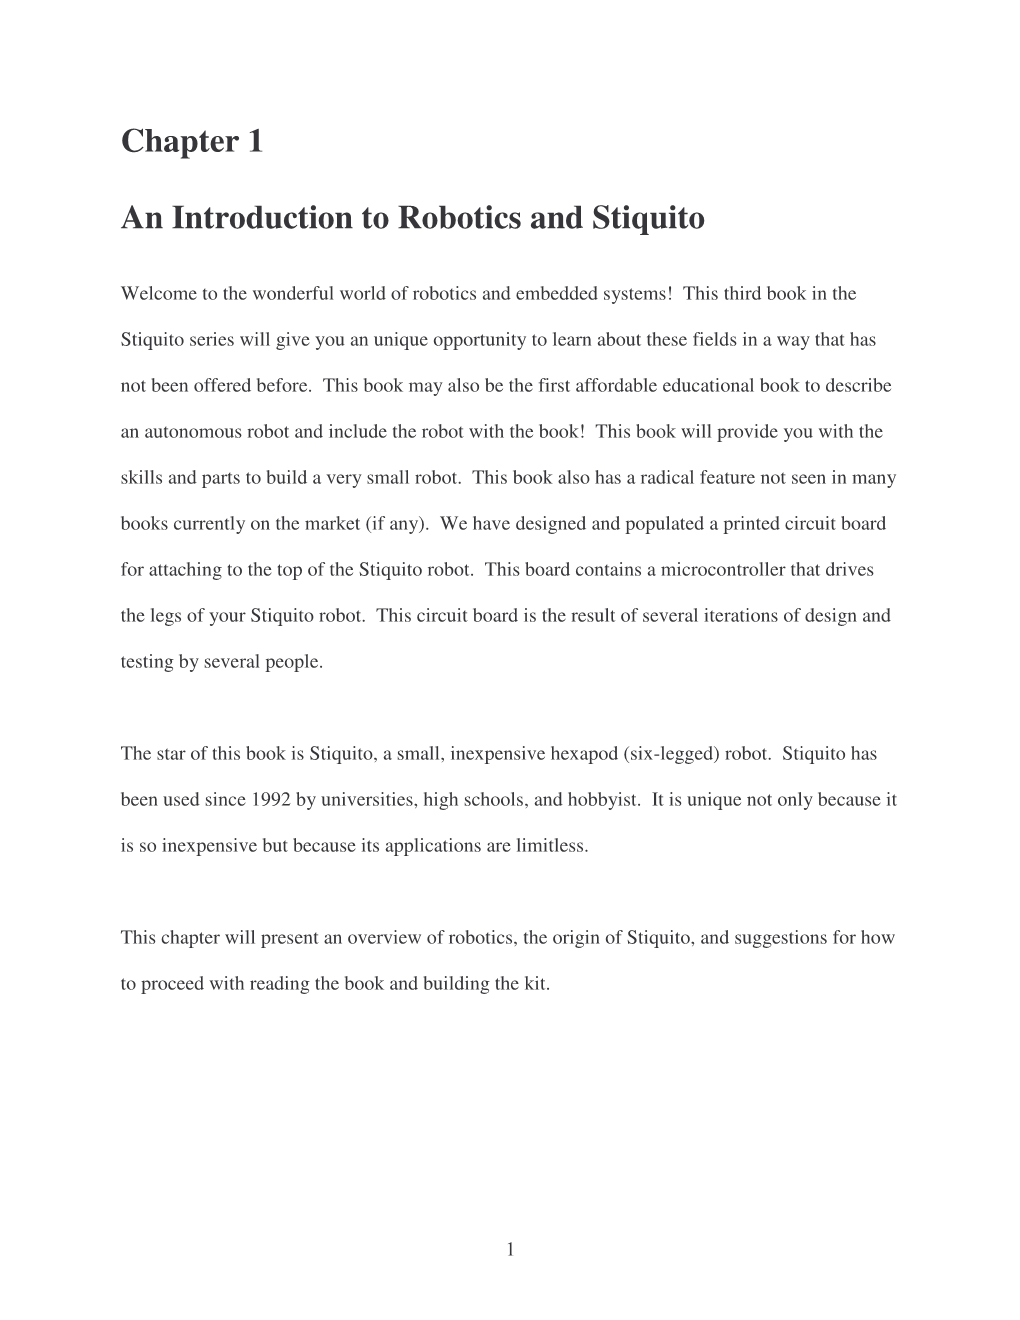 Chapter 1 an Introduction to Robotics and Stiquito